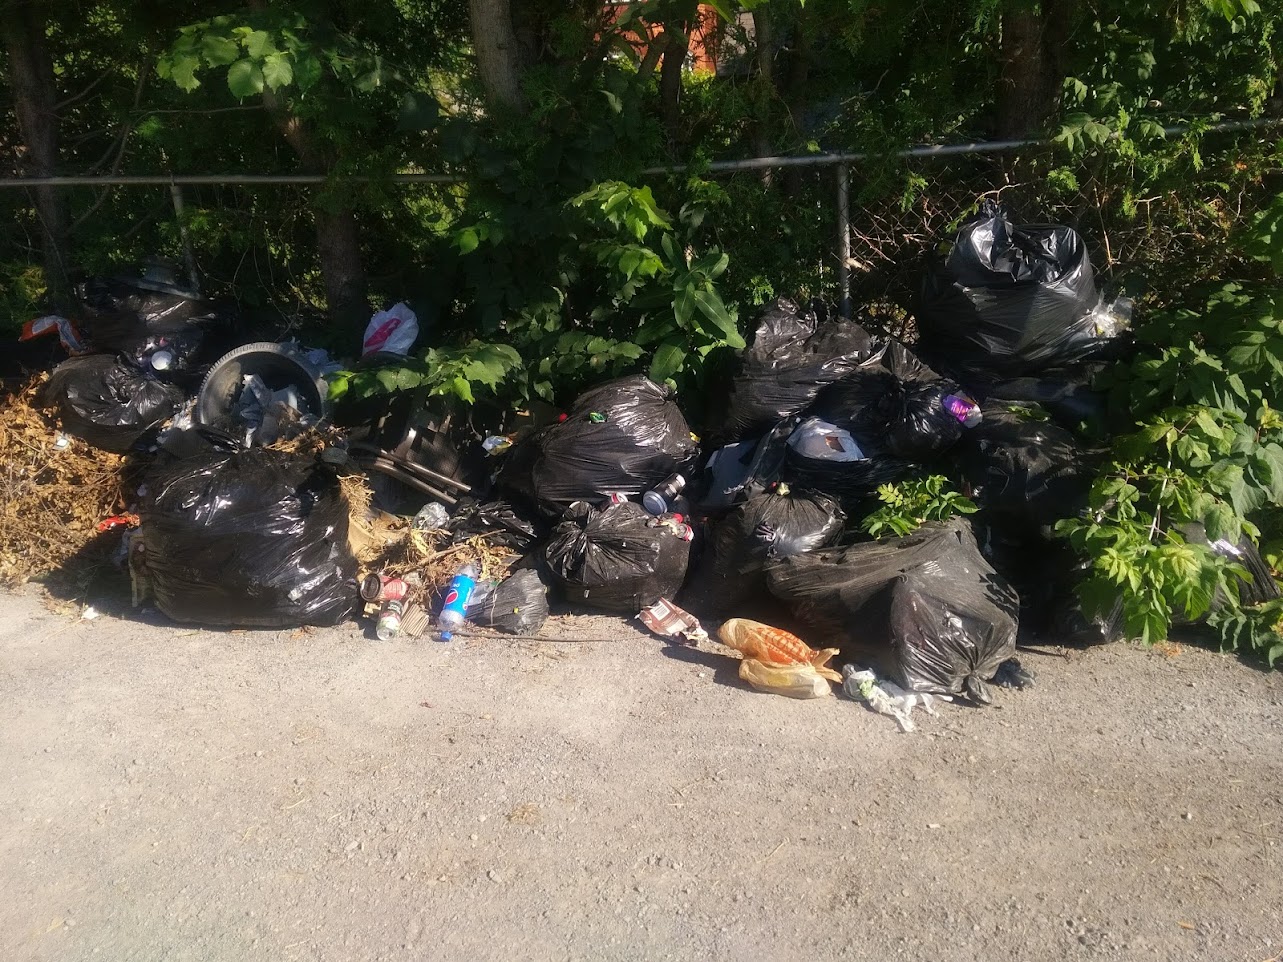 Picture of garbage bags illegally dumped along fence line